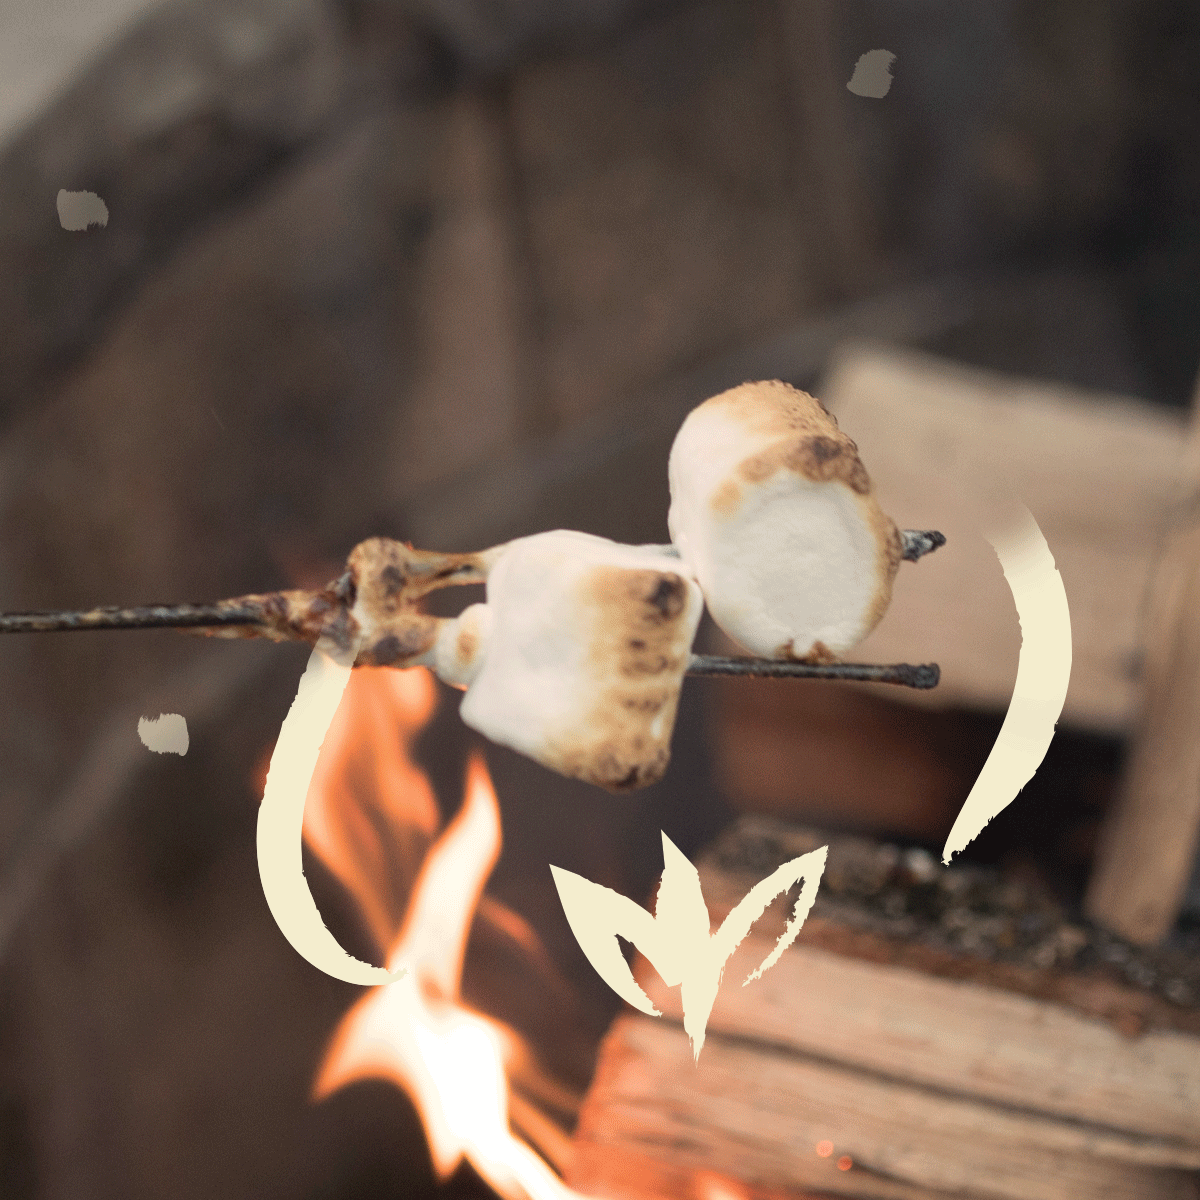   Post Caption:  Just one S’more reason to love family cookouts 🔥 #Smores 